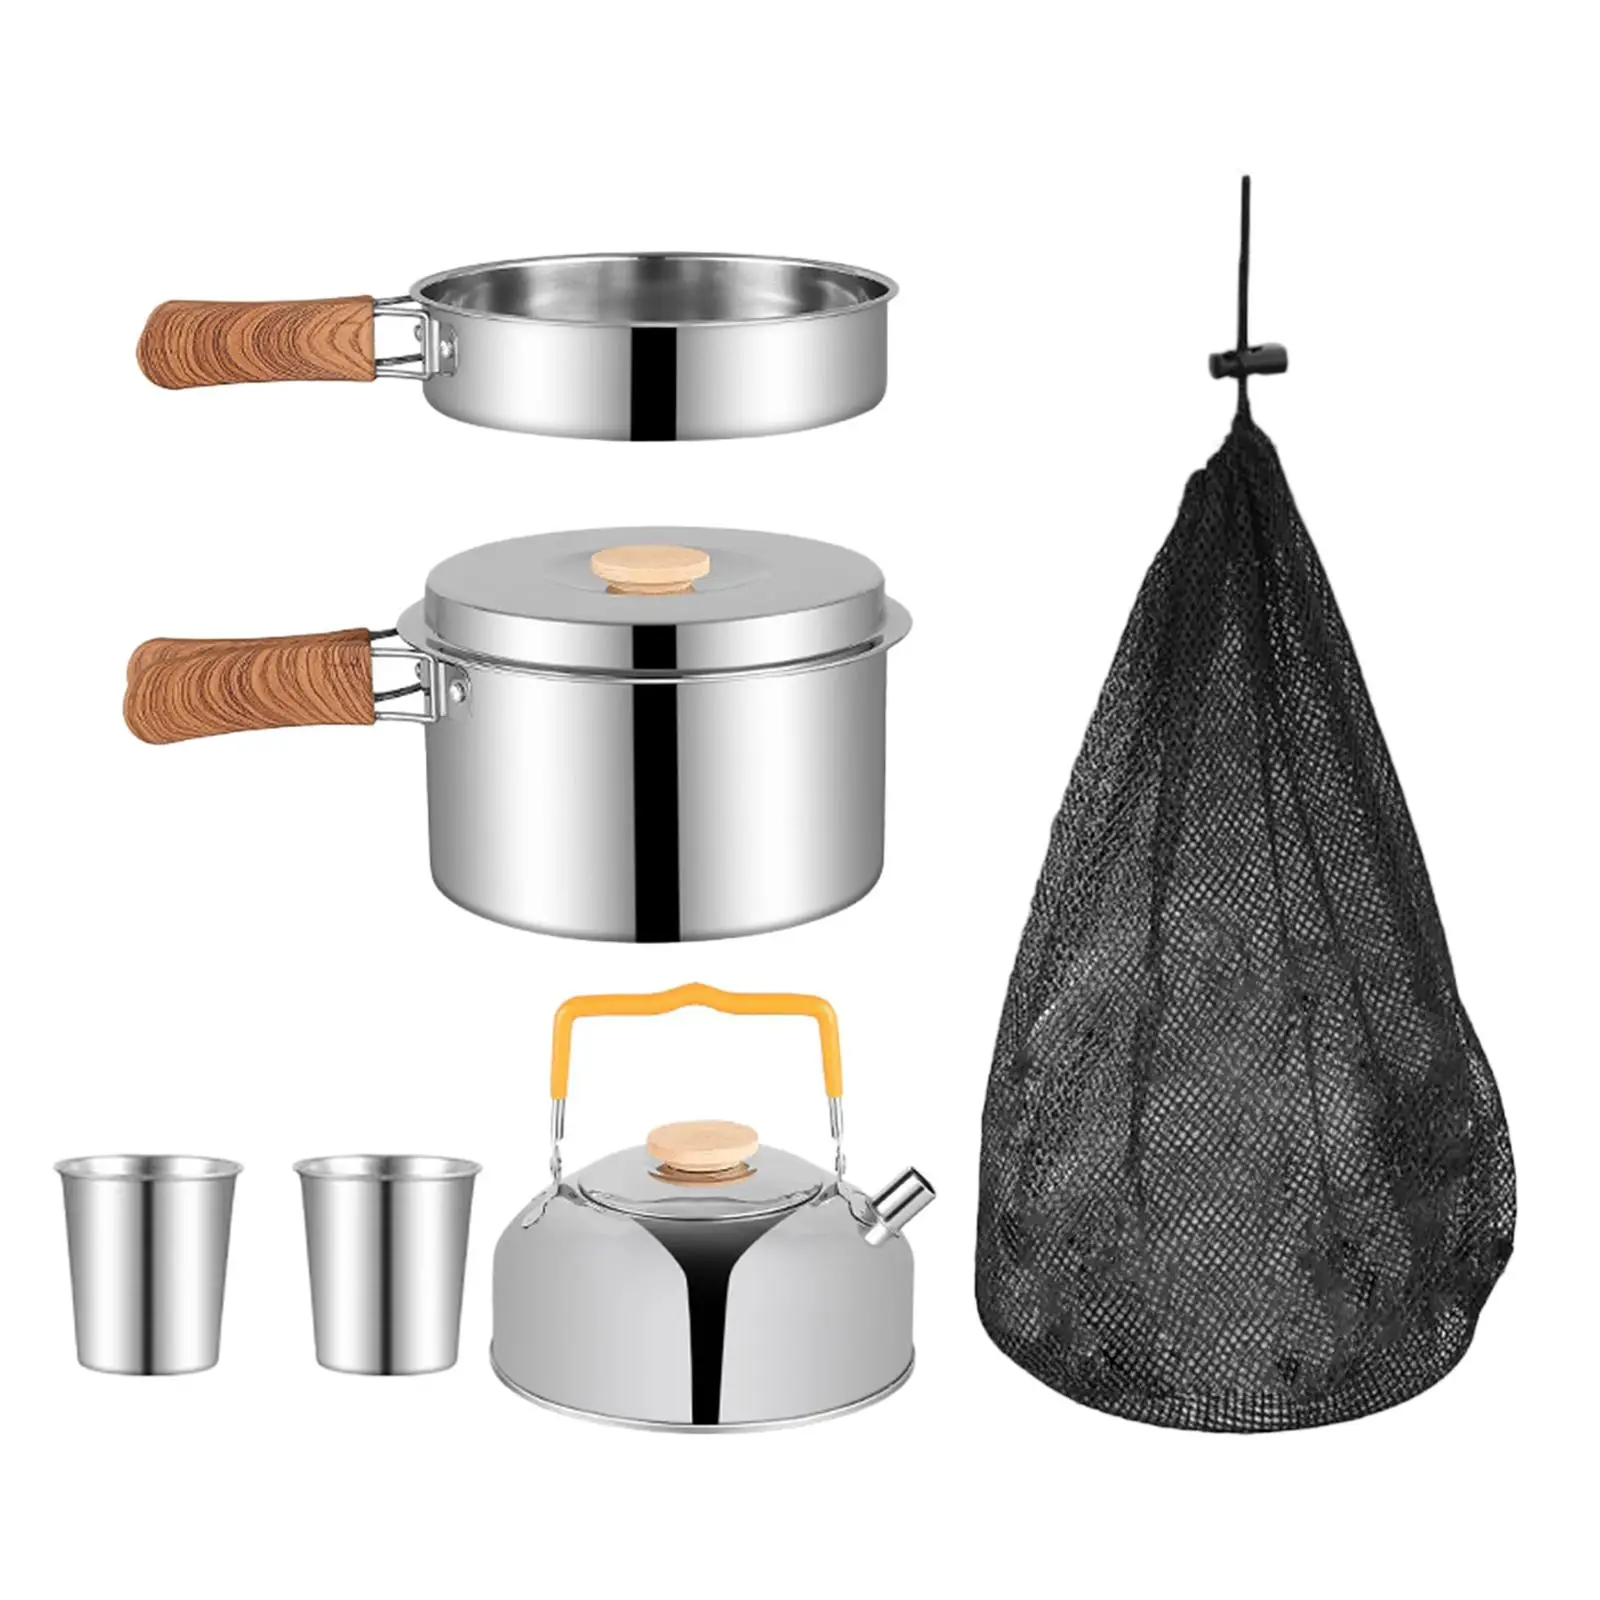 5x Camping Pot Pan and Kettle with Carry Bag Stockpot Camping Cookware Set for Home Mountaineering Fishing Equipment Supplies